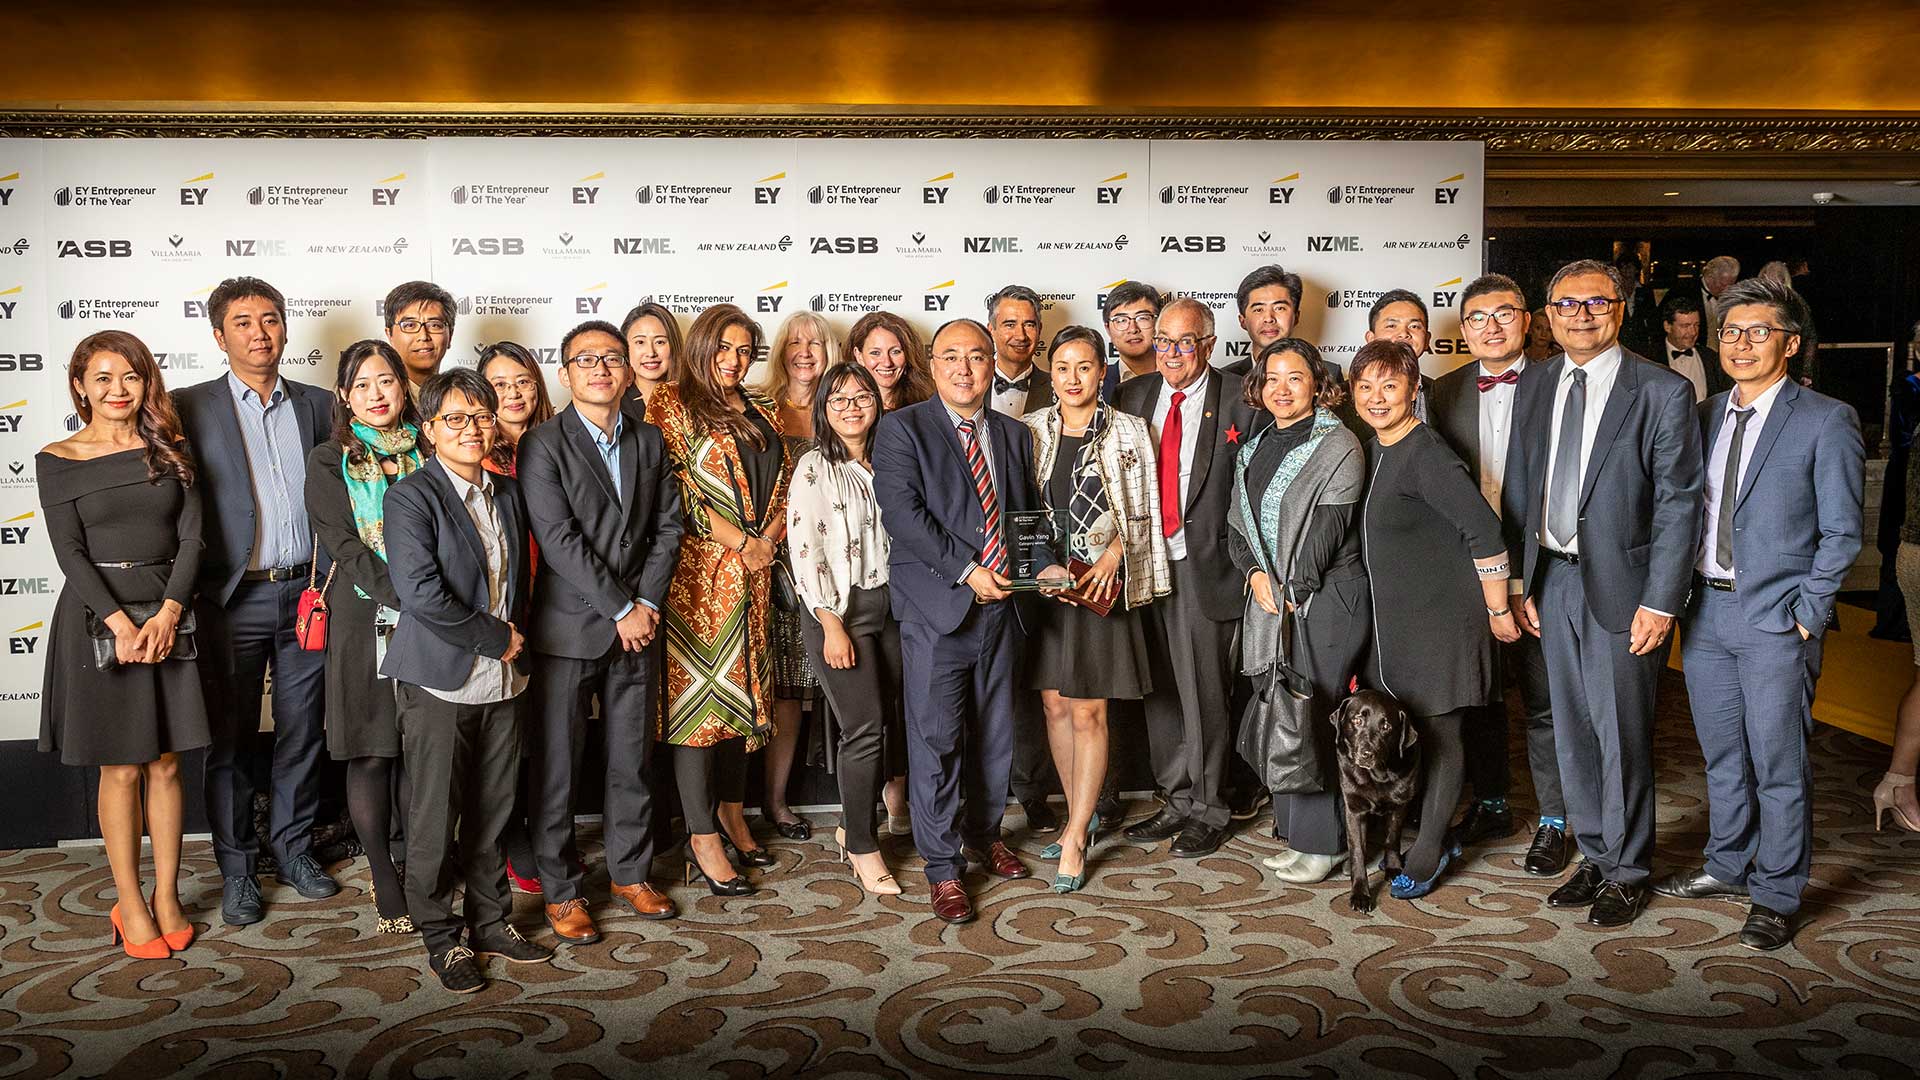 Trademonster team photo after winning Entrepreneur of the Year in 2019